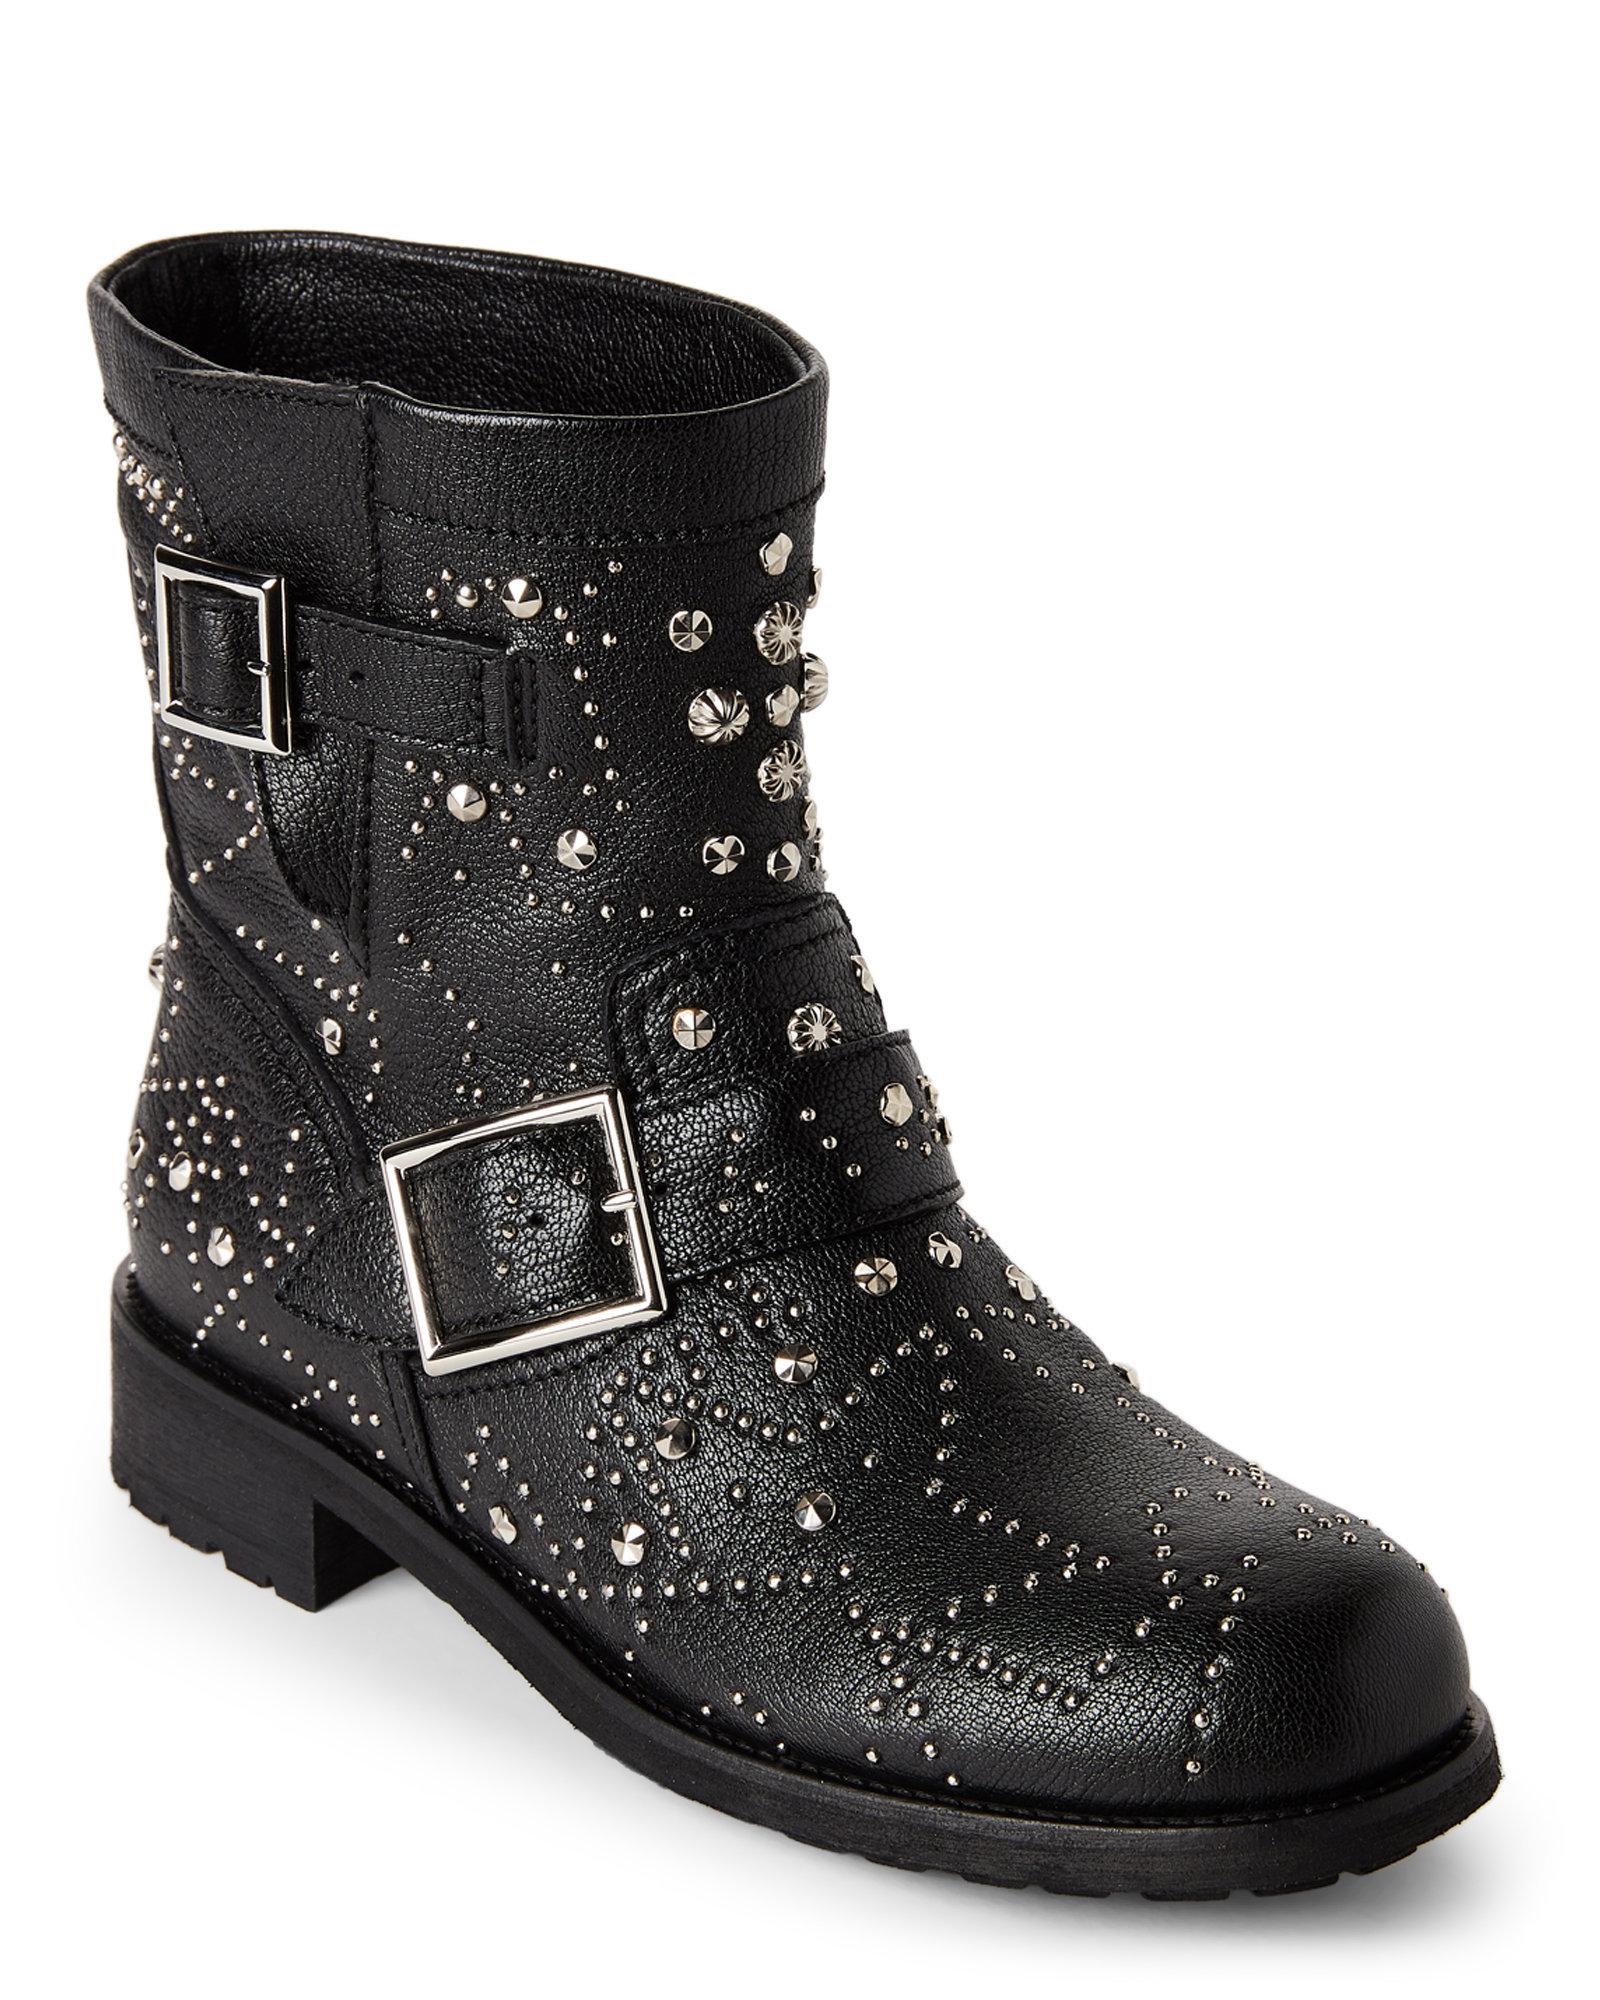 Lyst - Jimmy Choo Youth Biker Boots in Black - Save 68.08777429467085%